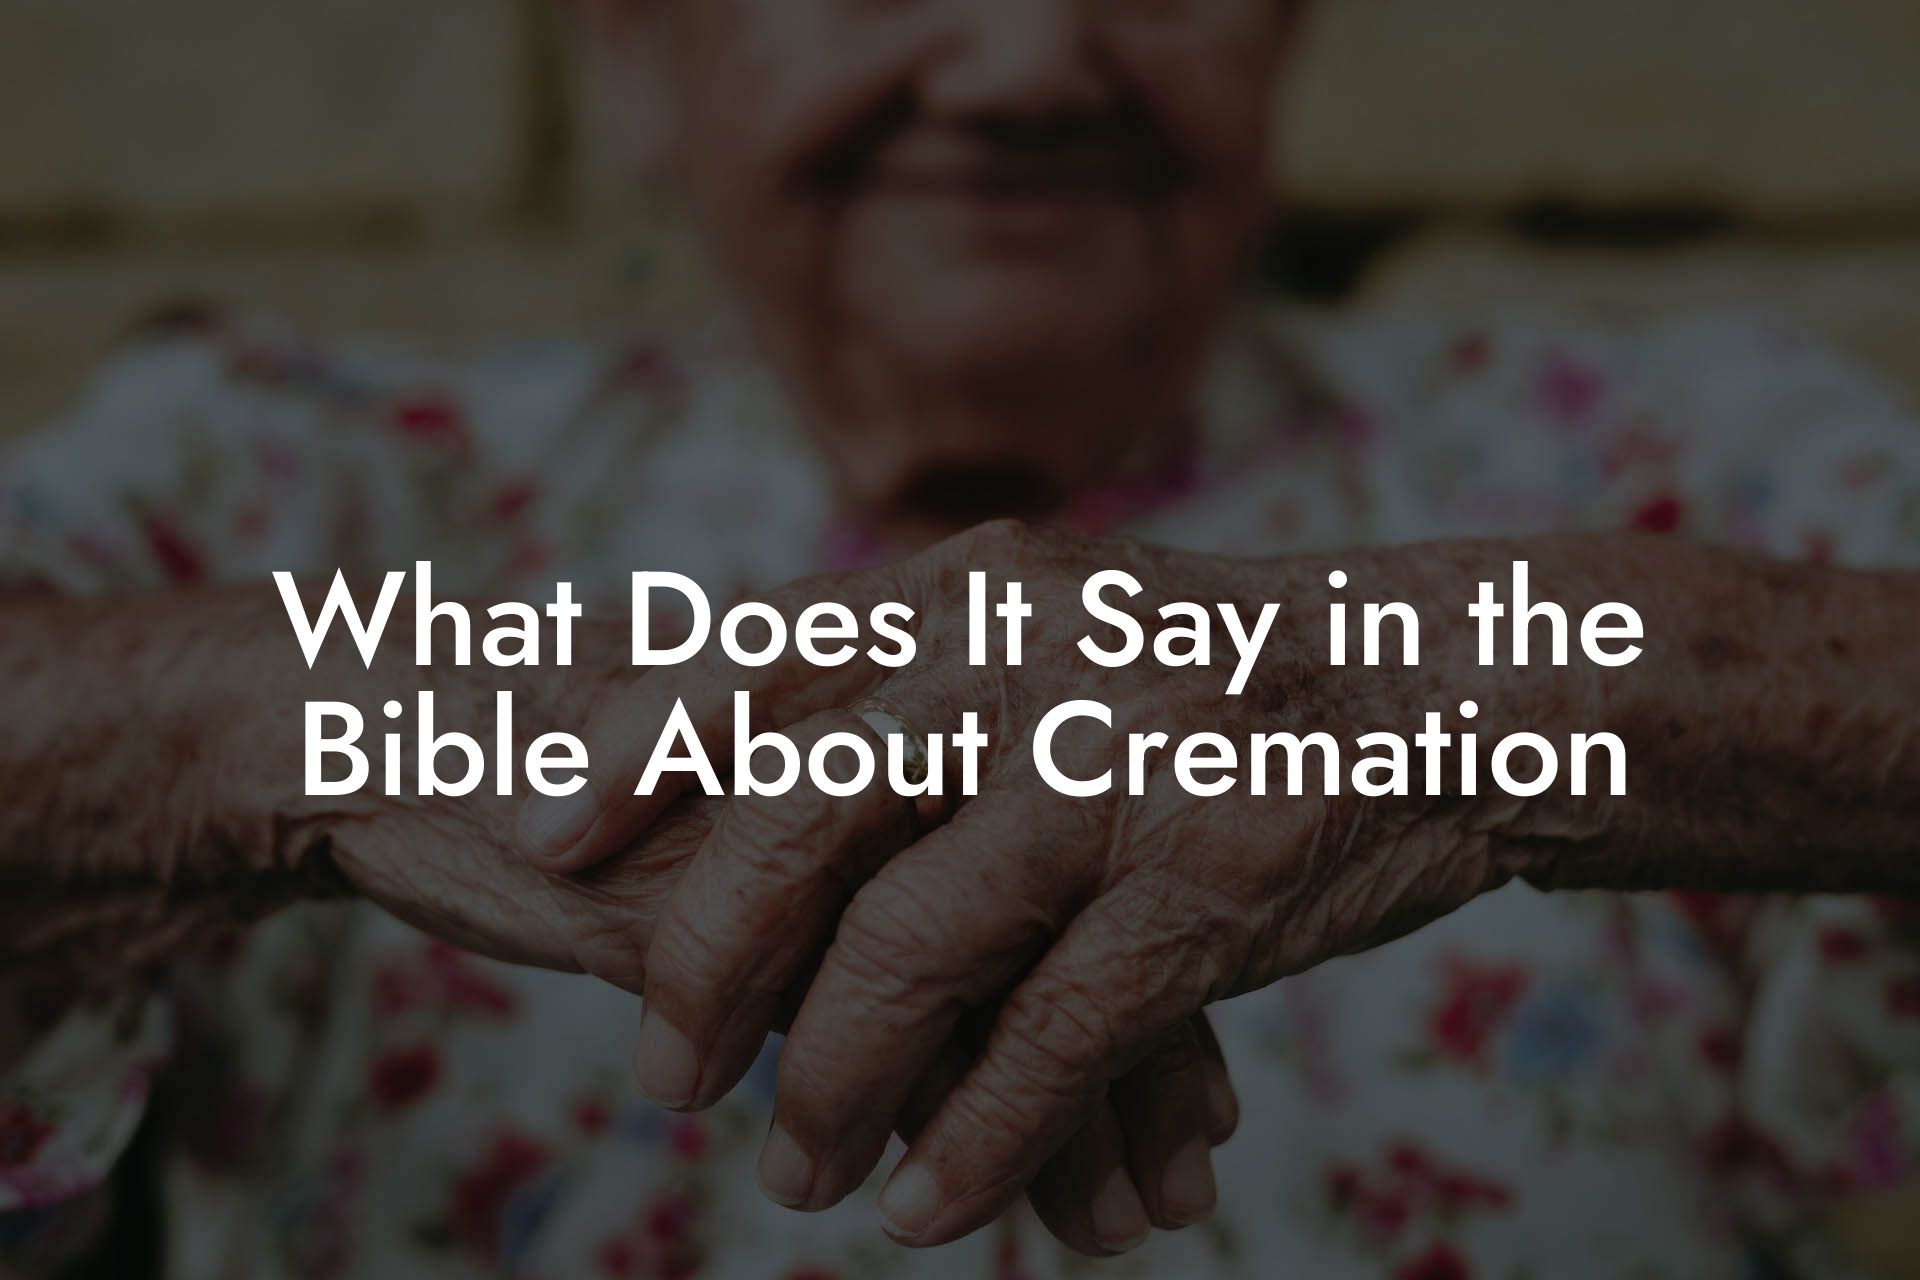 What Does It Say in the Bible About Cremation